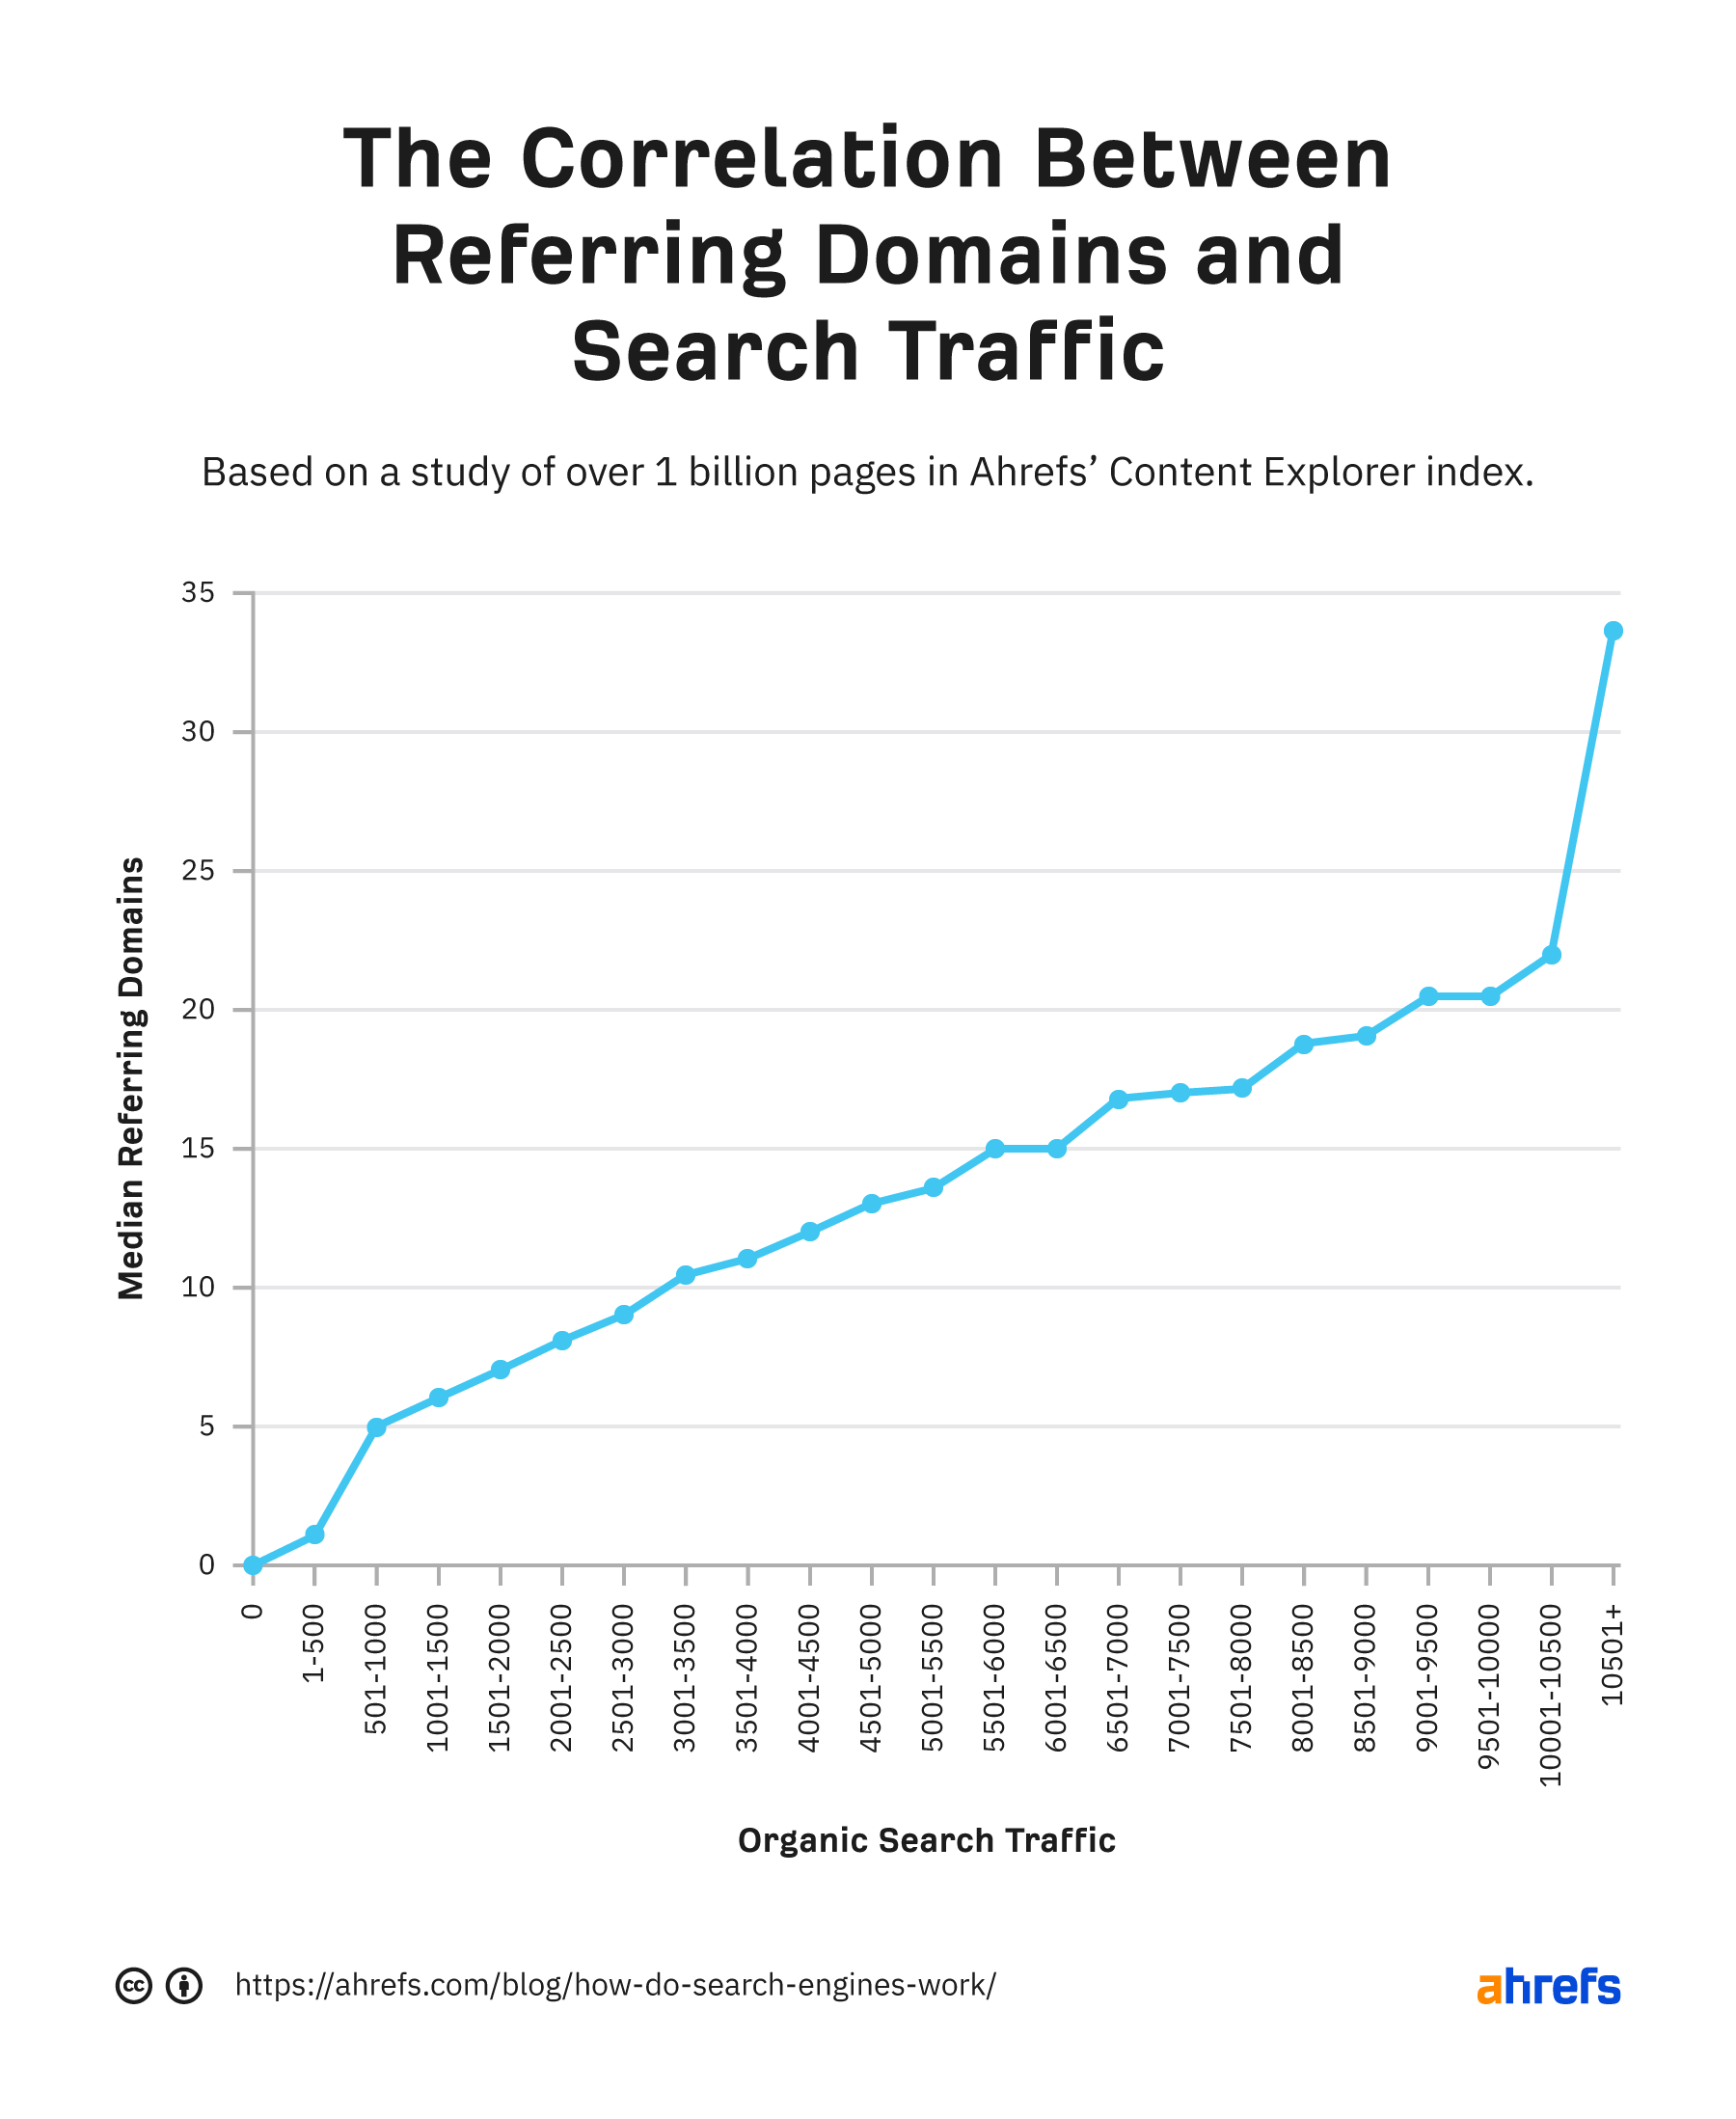 The correlation between referring domains and search traffic